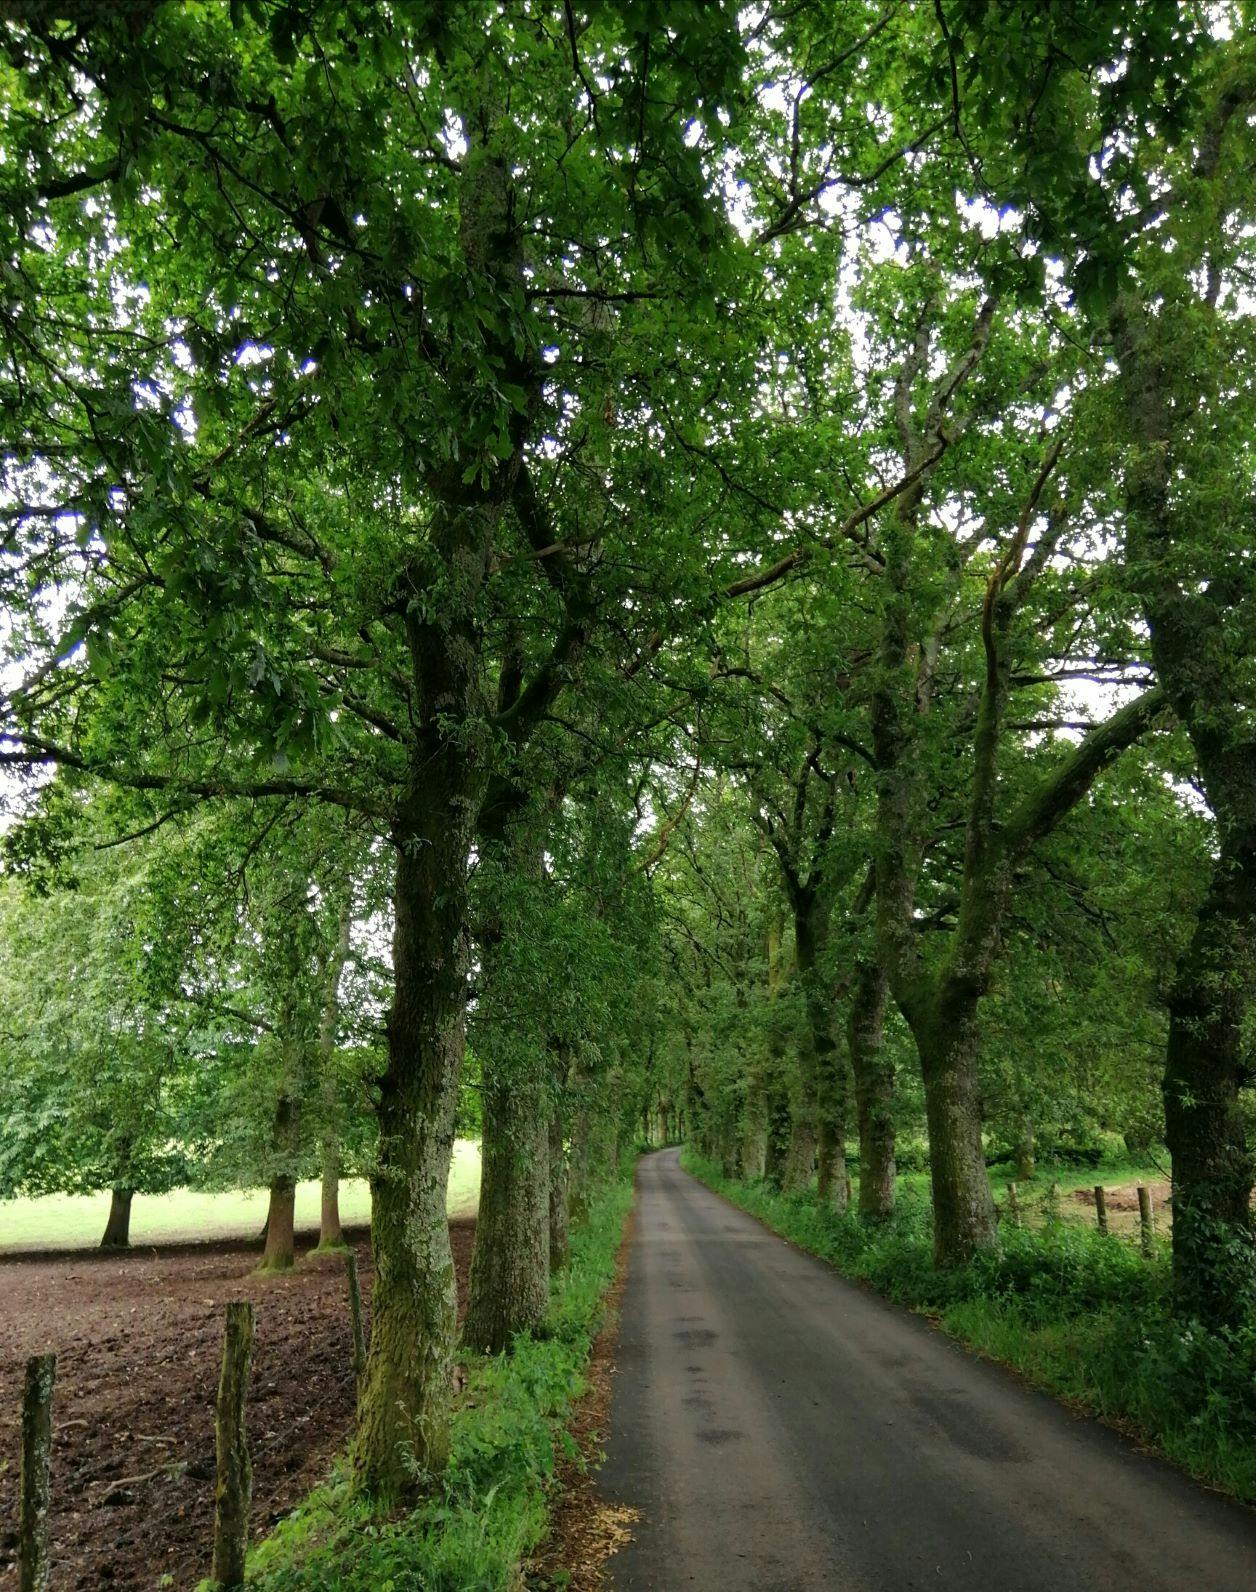 OAK LINED ROAD LEADING UP TO HOTEL